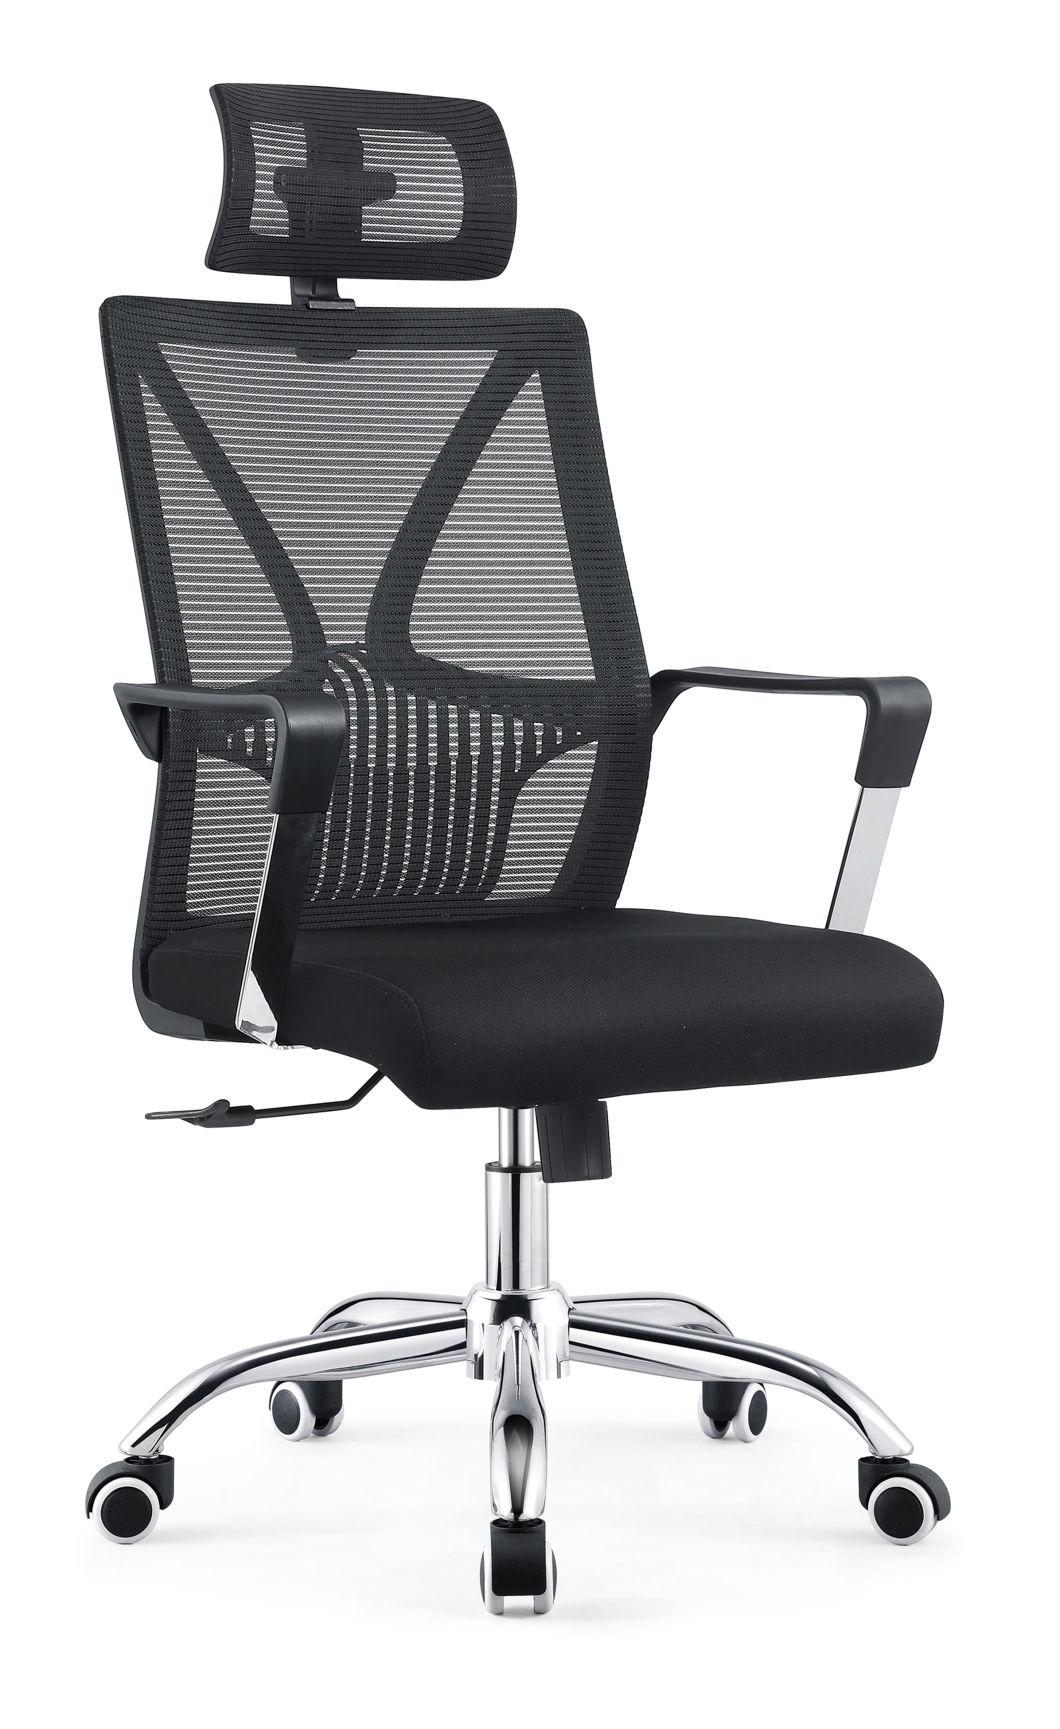 Adjustable Mesh Back Office Chair with Headrest-1921A (BIFMA)